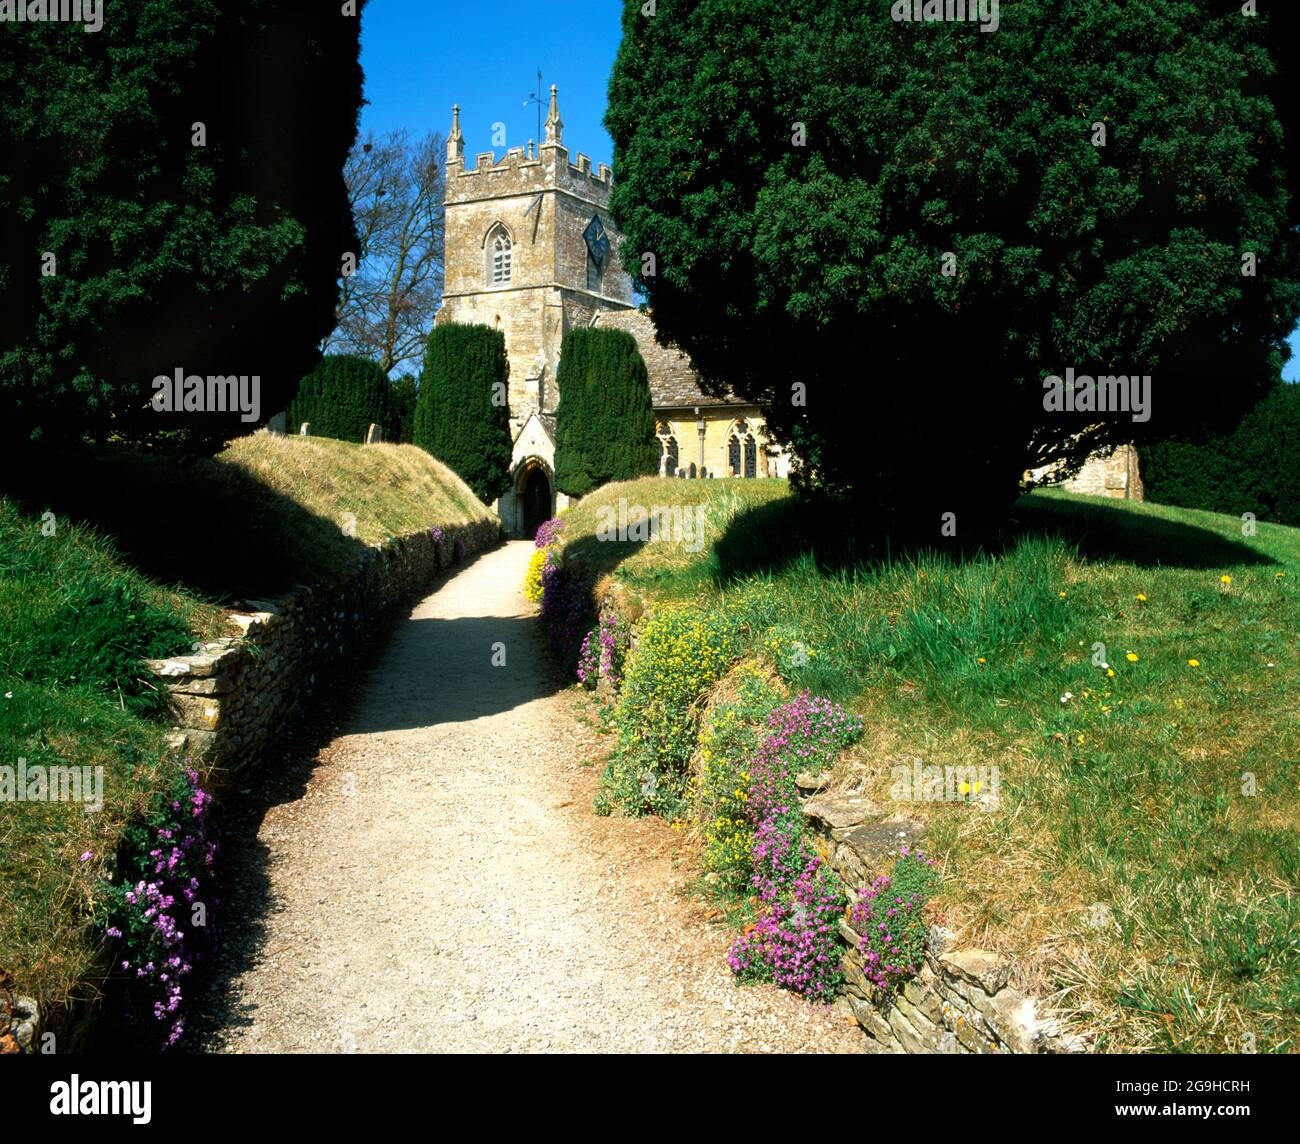 St Peter's Church, Upper Slaughter, Cotswolds, Gloucestershire. Foto Stock